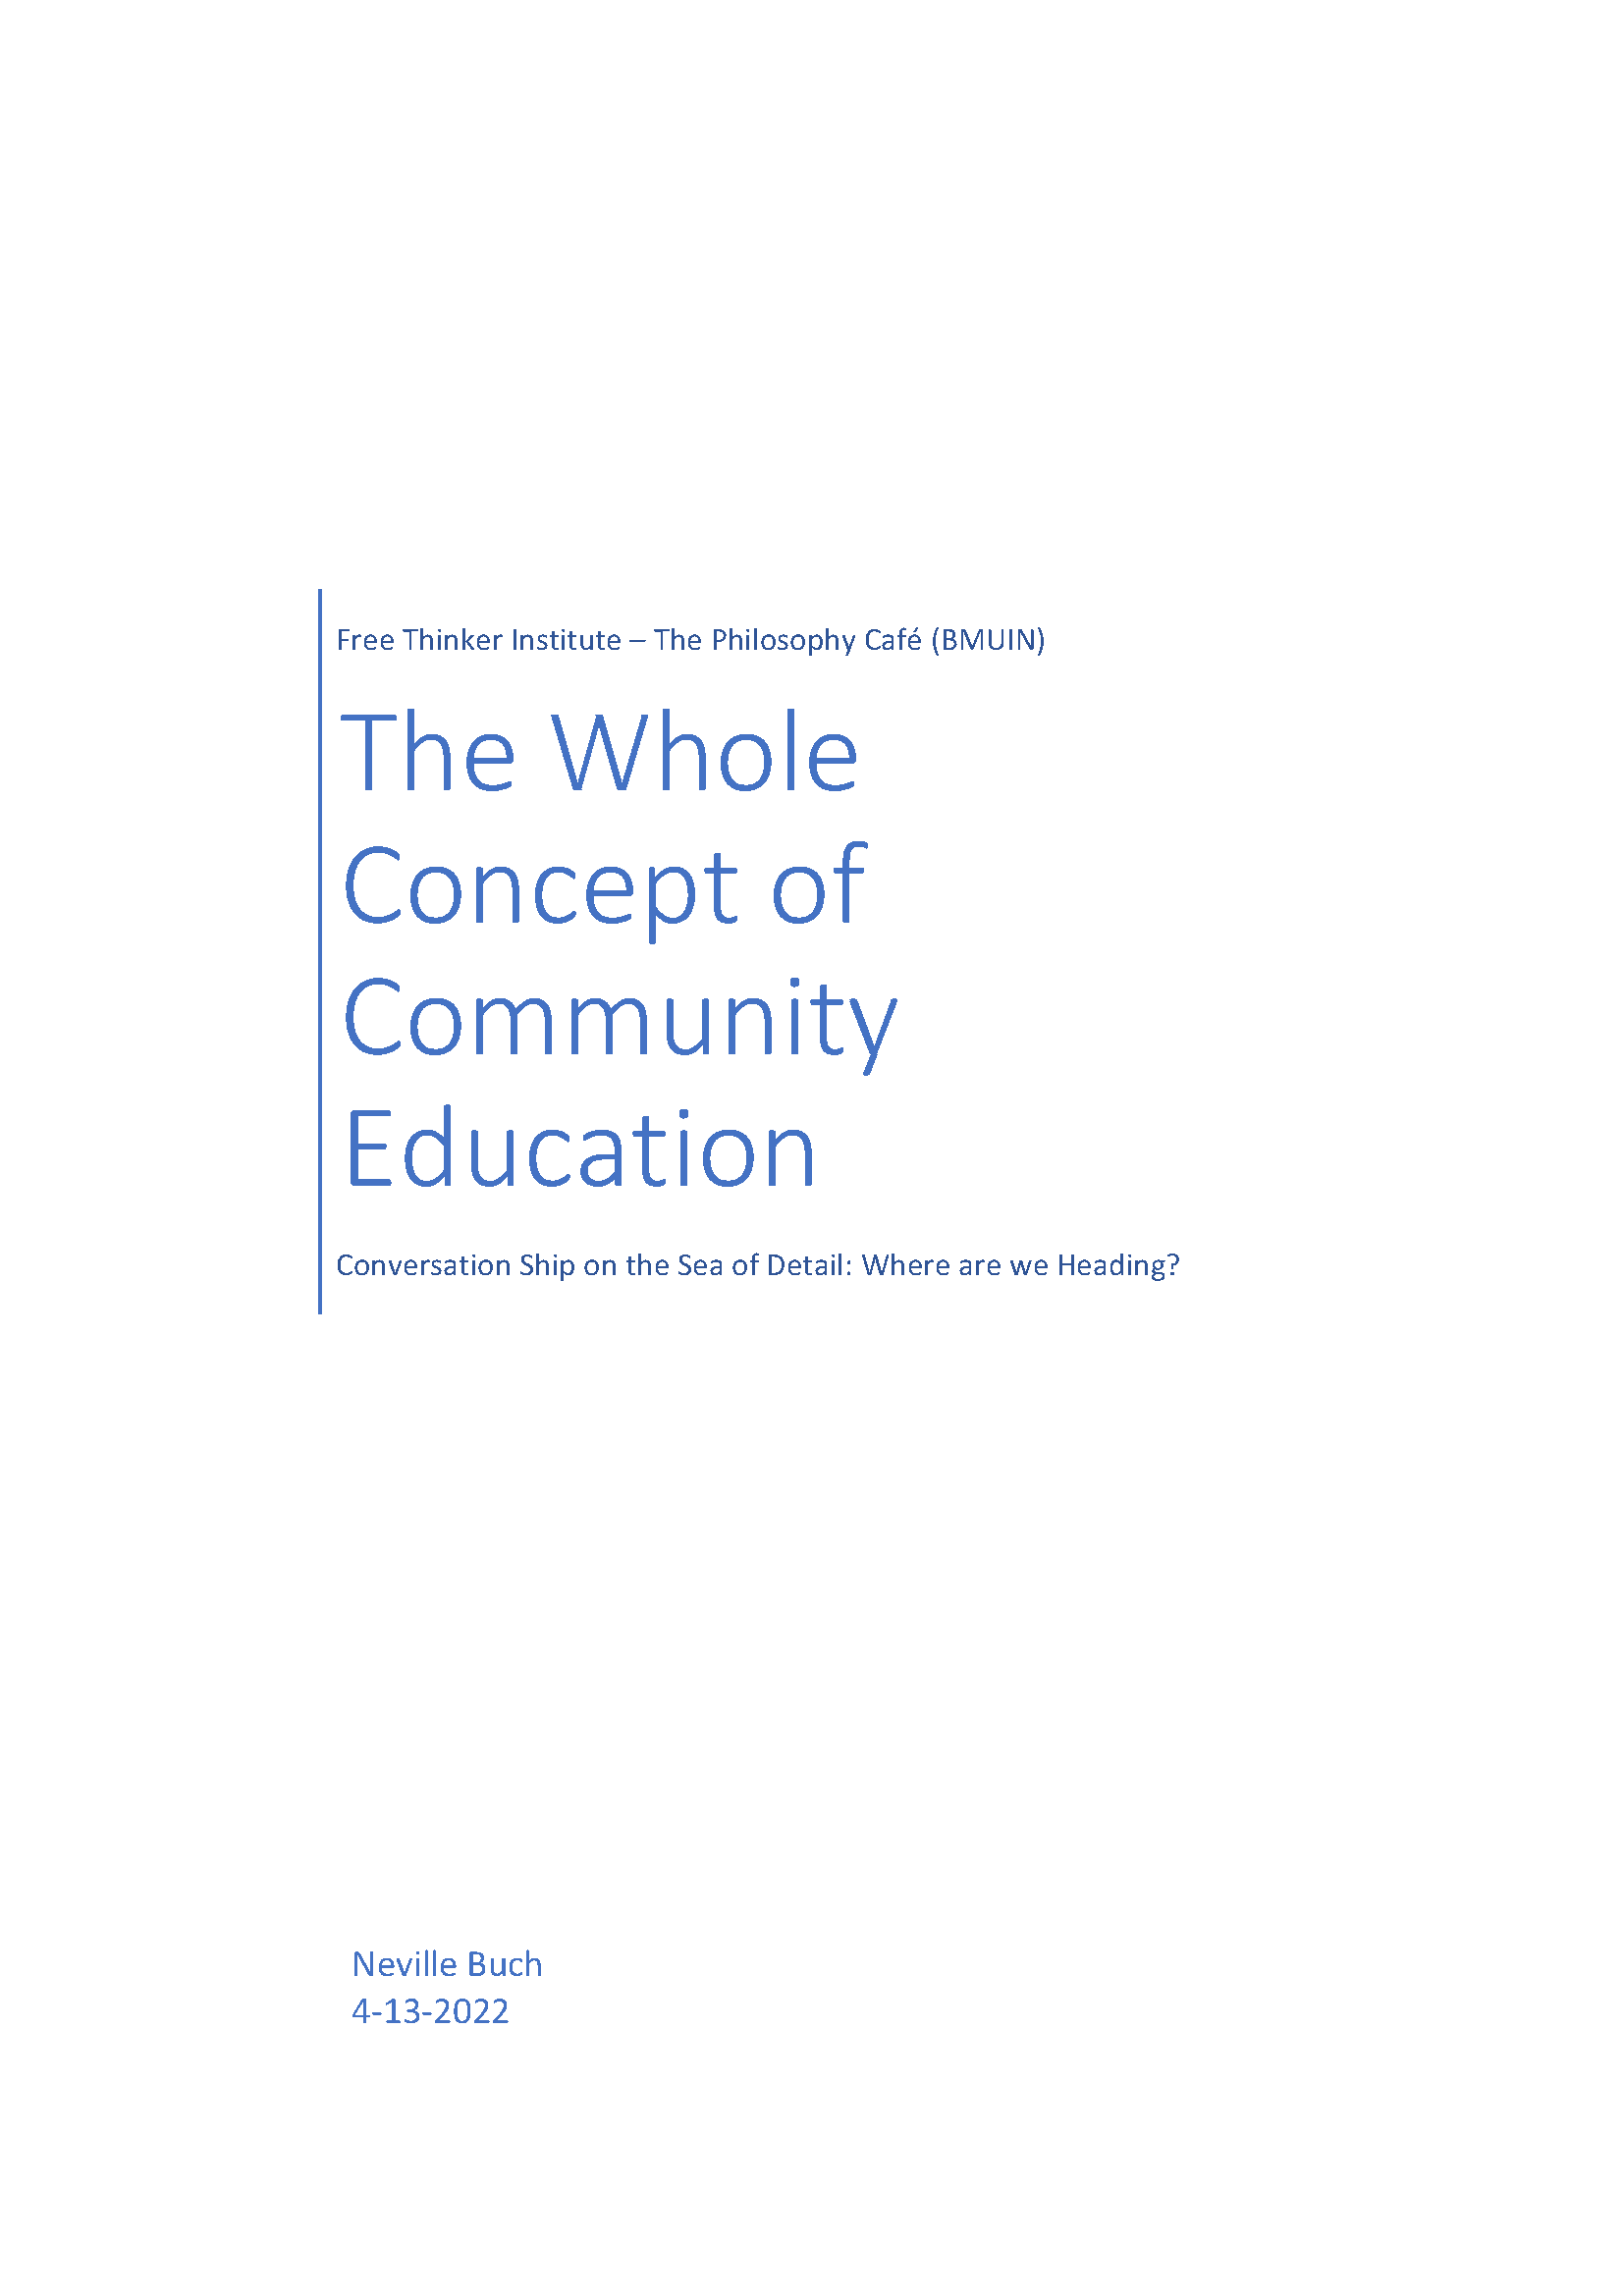 History and Practice of Community Education. CET No. 4: The Whole Concept of Community Education 3